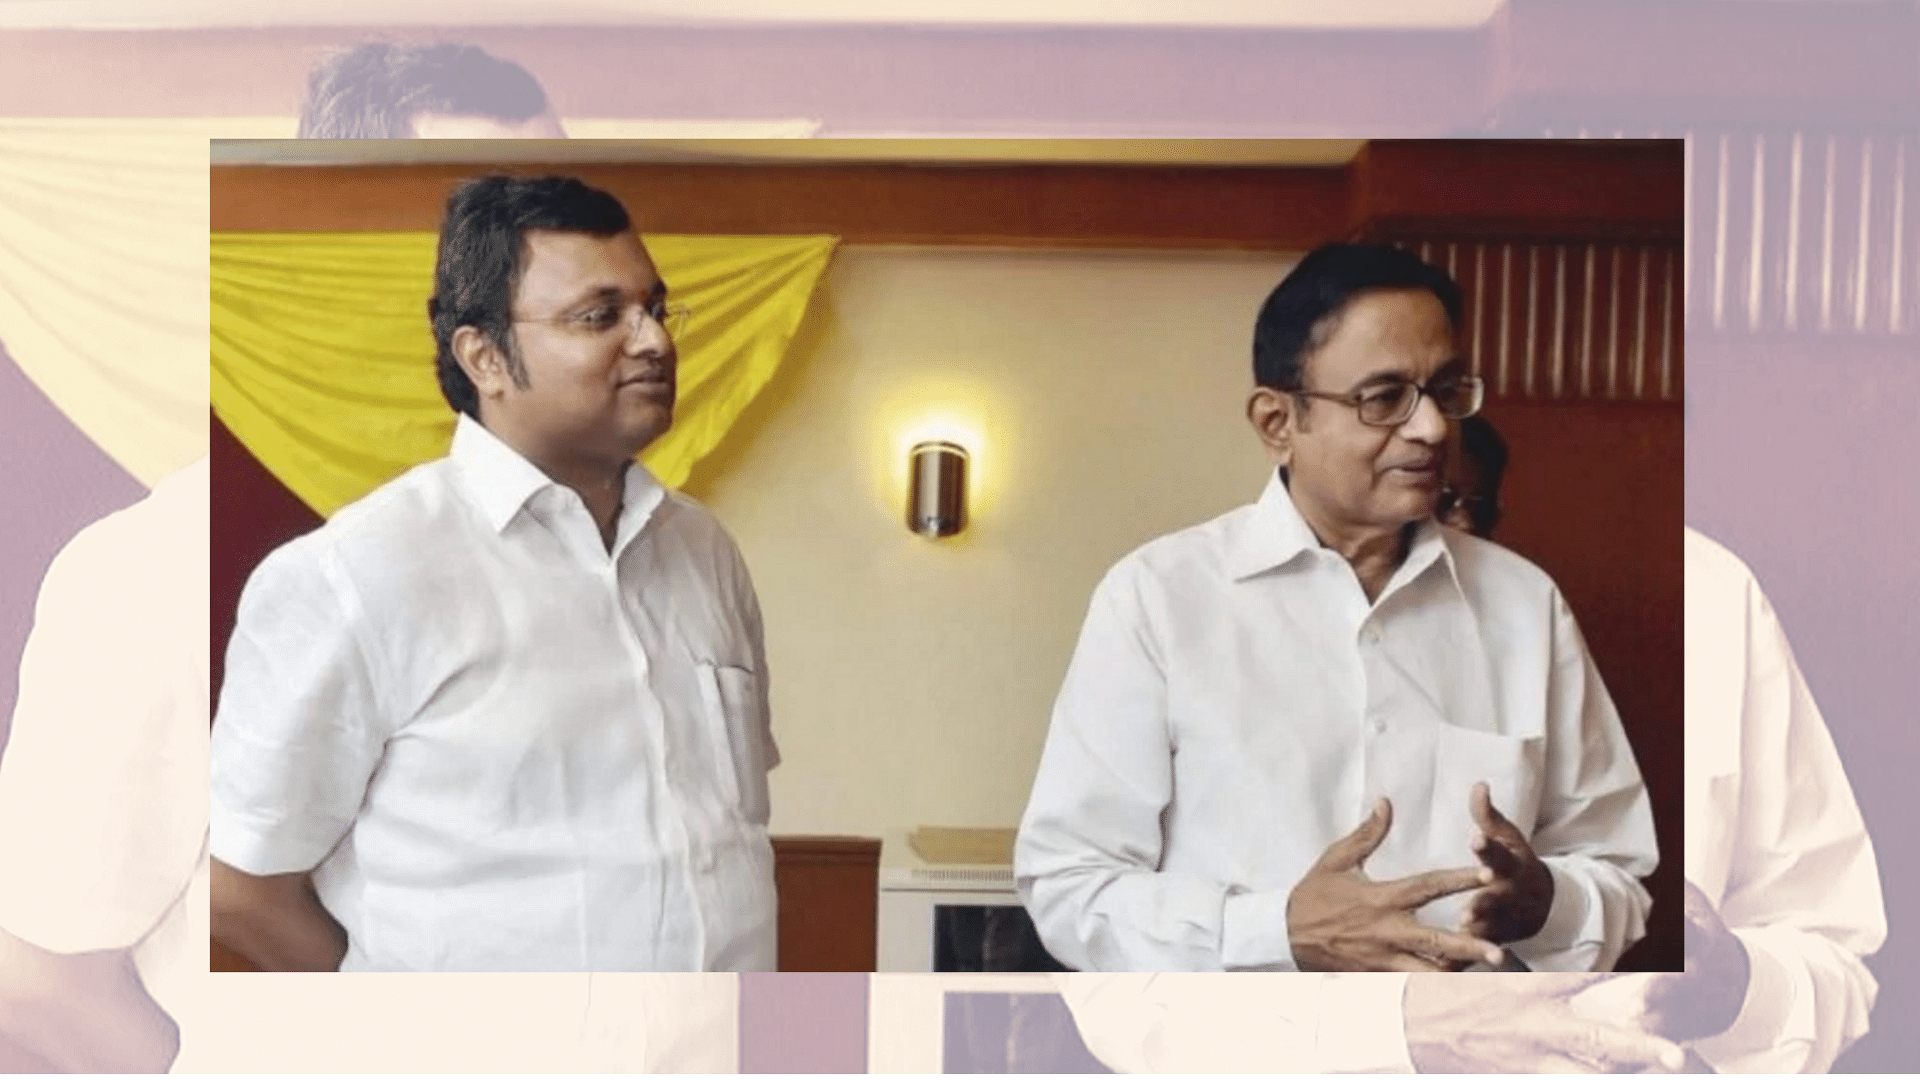 Karti Chidambaram misses his father, P Chidambaram, who is currently in Tihar Jail, on his 74th birthday.